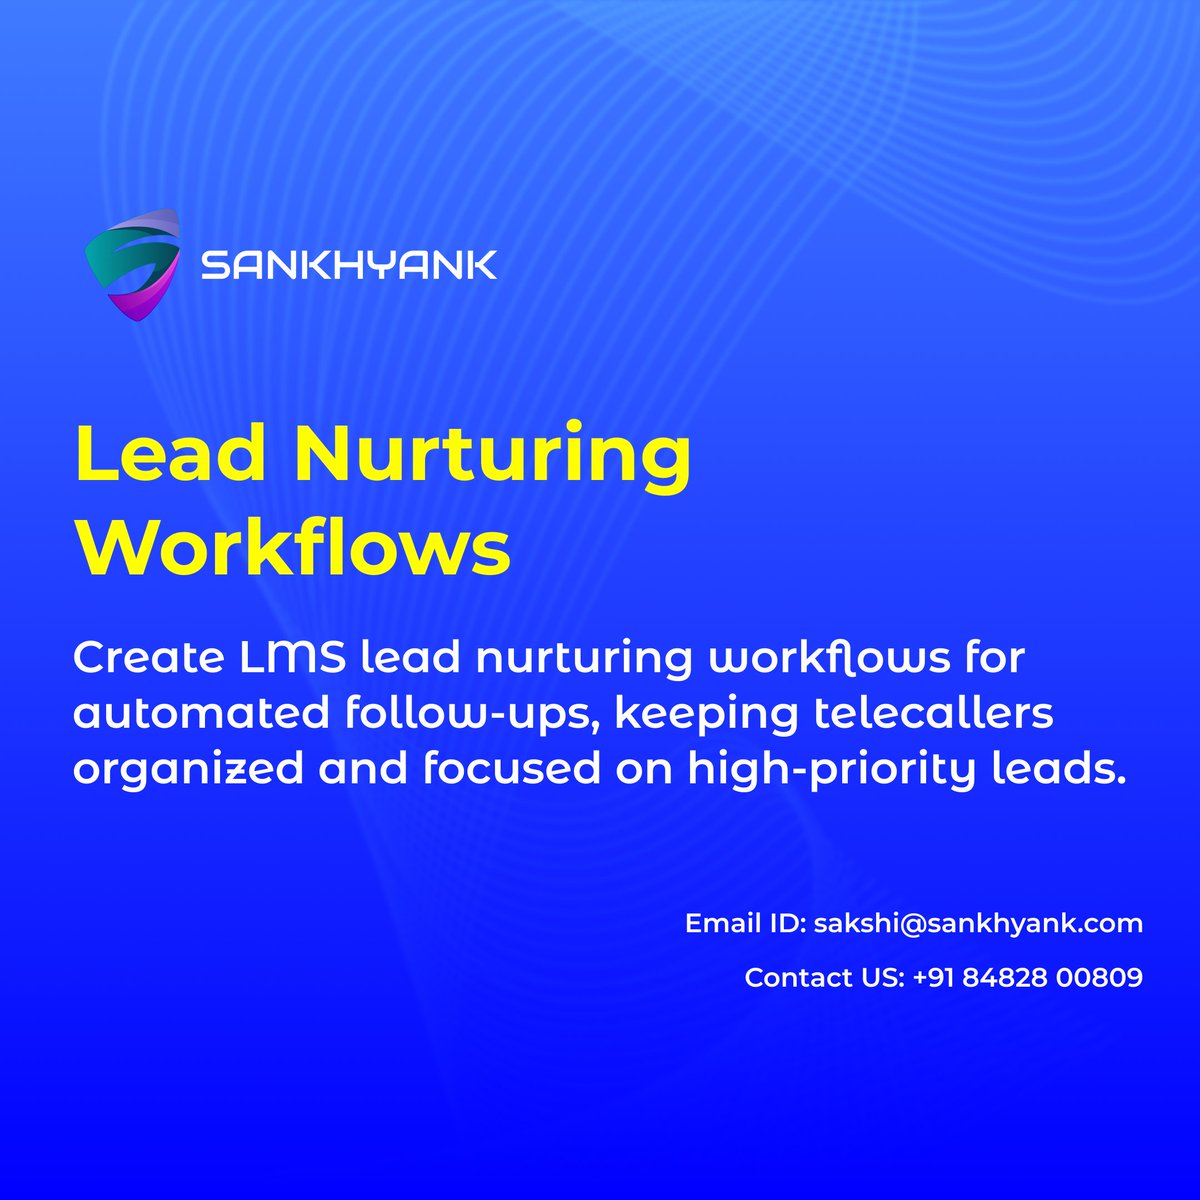 🌱✉️📞 Develop LMS lead 💼 nurturing workflows for seamless follow-ups! 🔄 Keep telecallers organized 📊and focused on 🚀🔥high-priority 🎯leads for maximum 📈conversion.📋
@Sankhyank__
#LeadNurturing #WorkflowAutomation #CRMSoftware #TelecallerEfficiency #SalesSuccess #Automatio